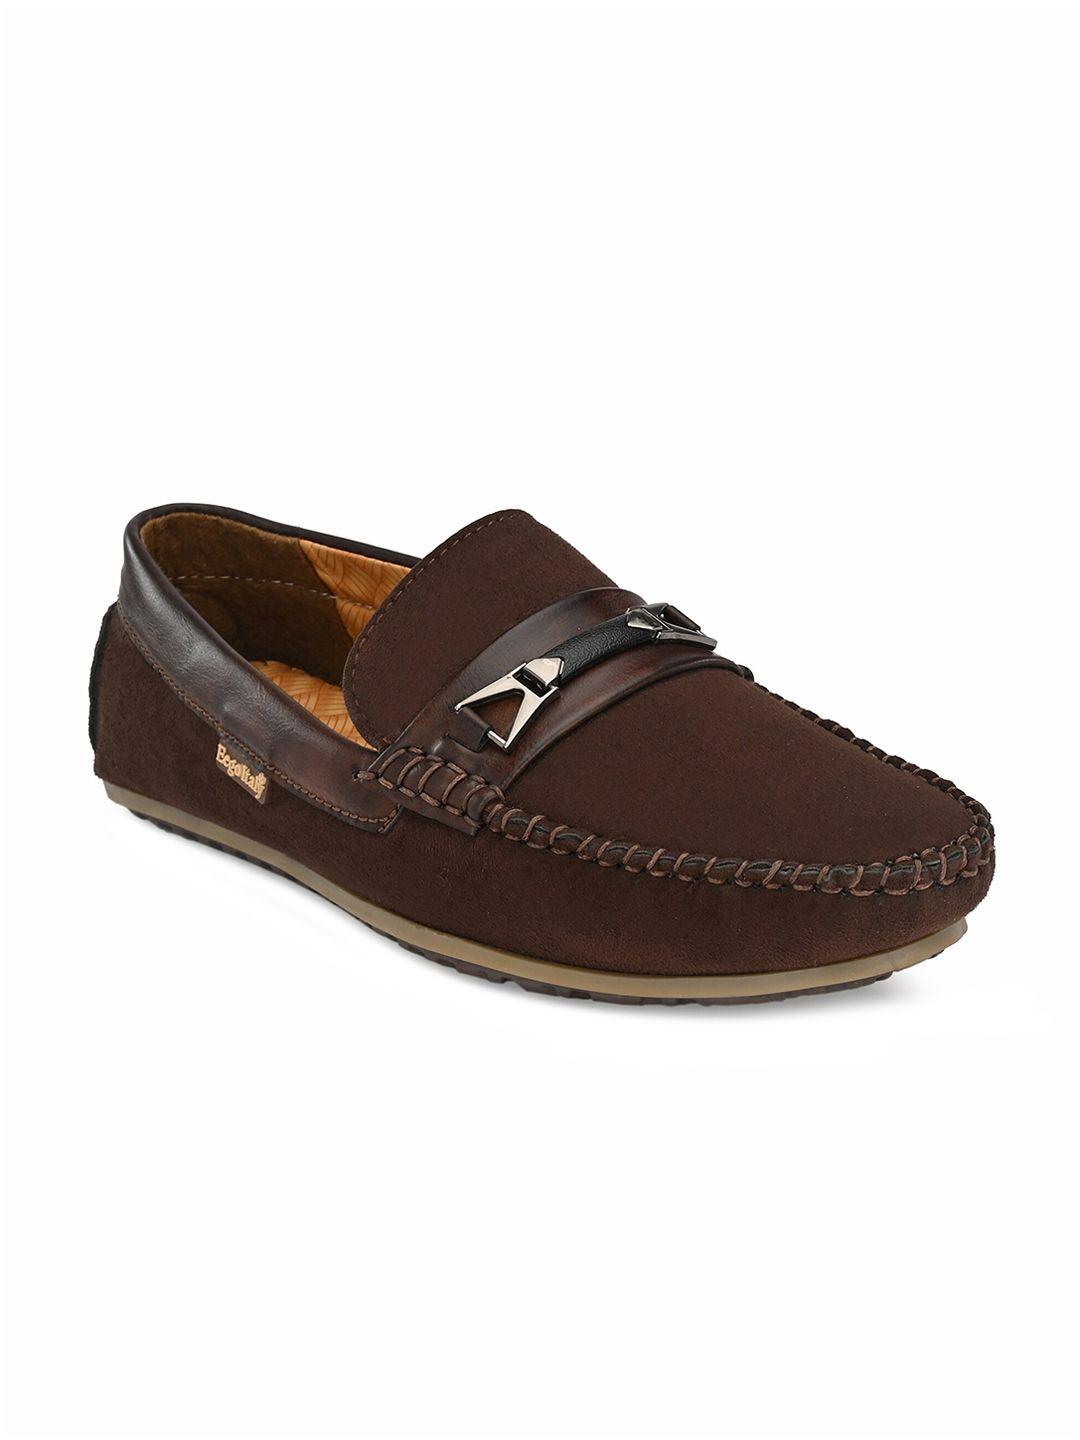 eego italy men brown loafers